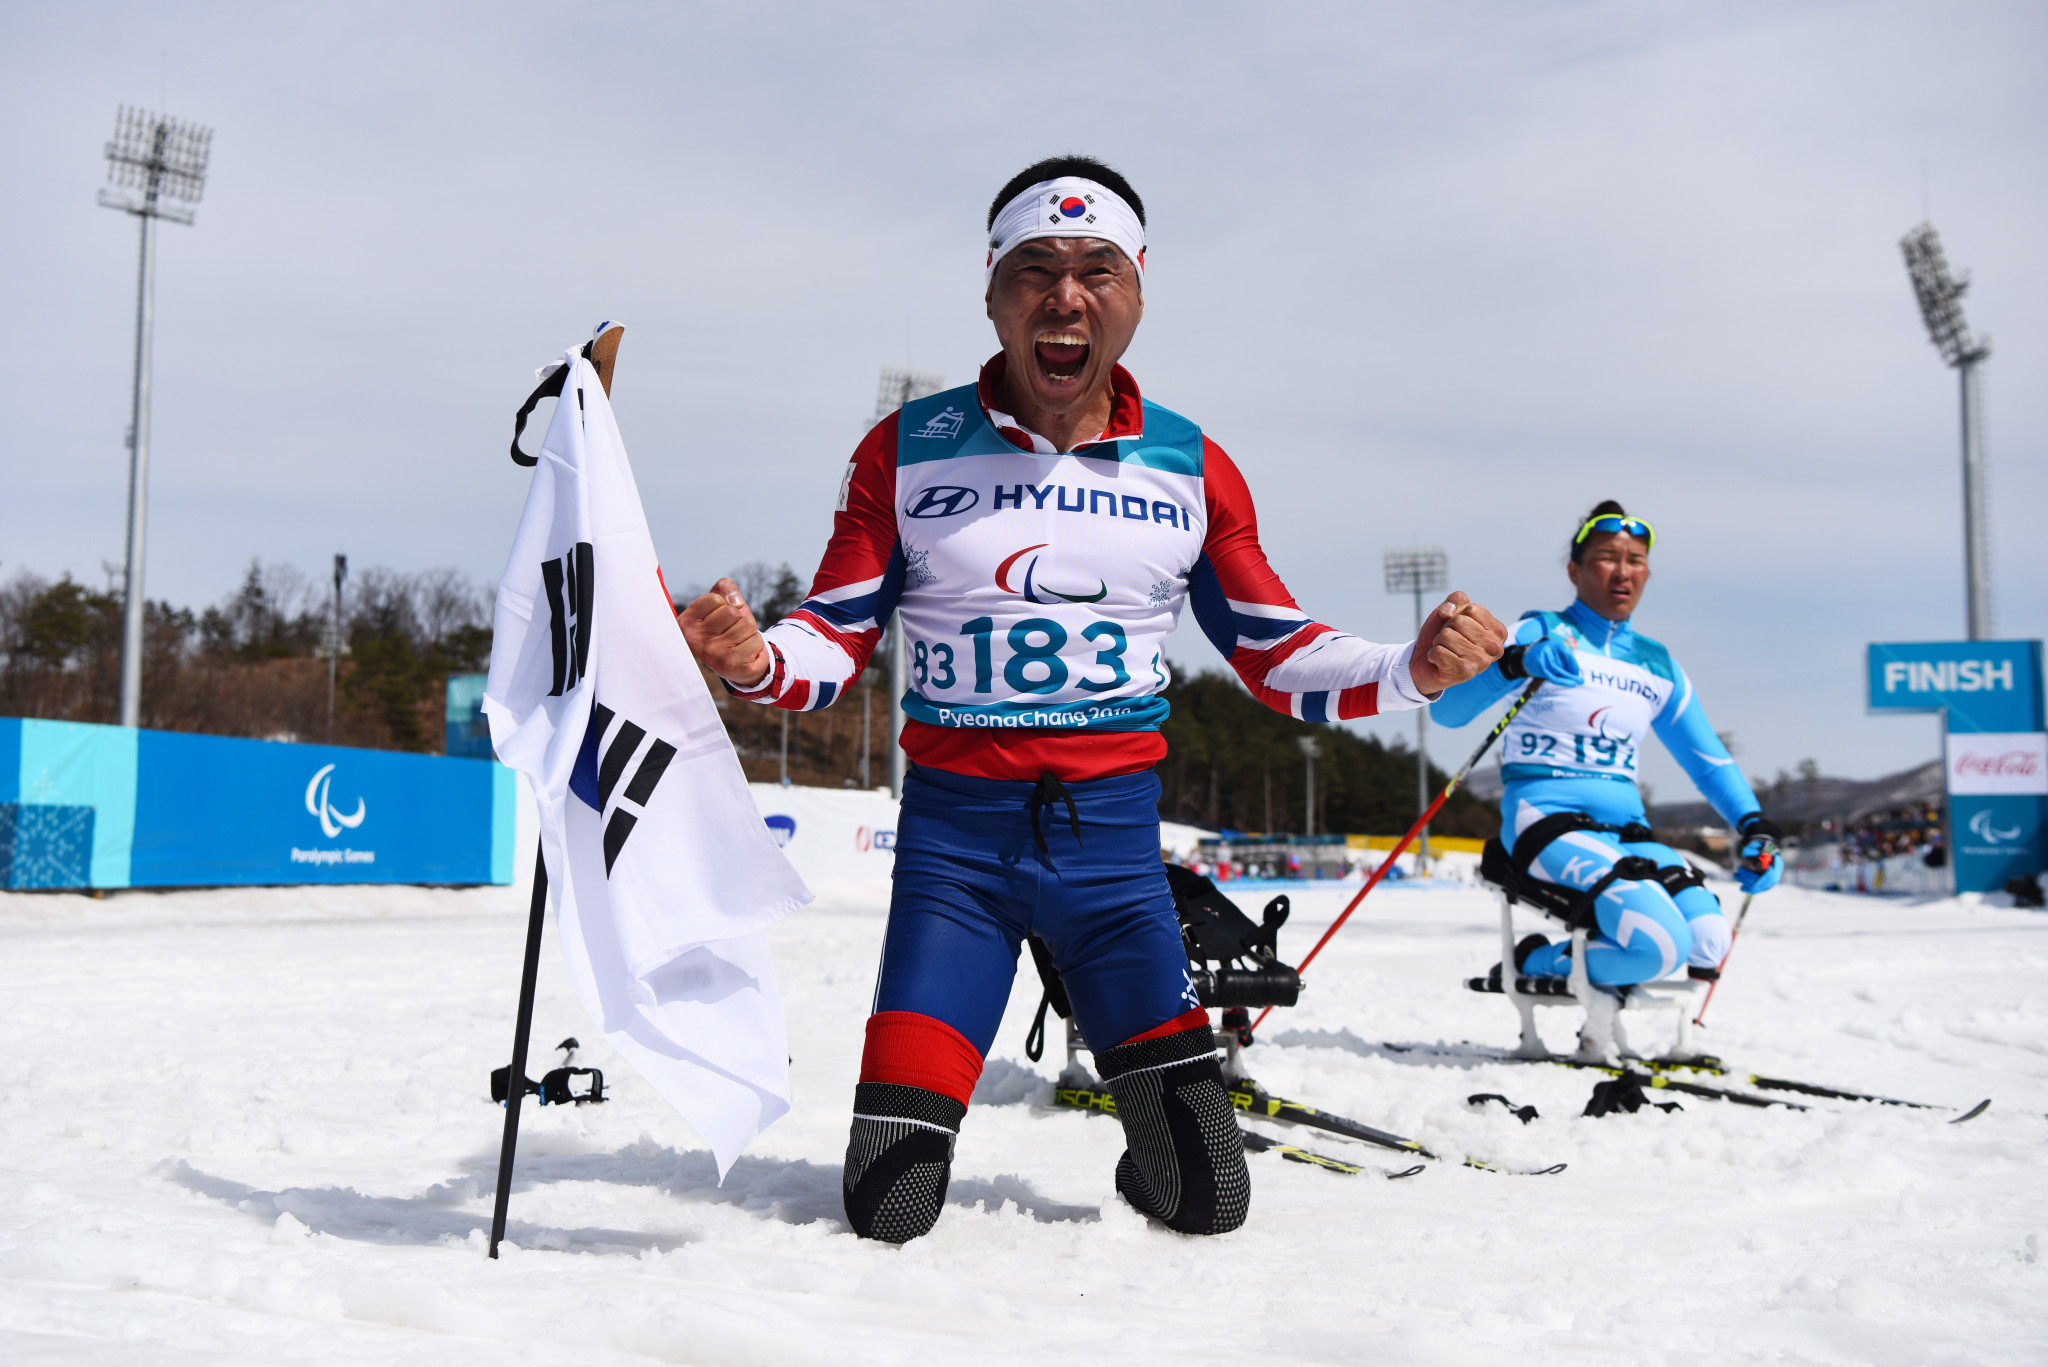 Cross-country skier Sin Eui-hyun became South Korea's first Winter Paralympic Games gold medallist at Pyeongchang 2018 ©Getty Images